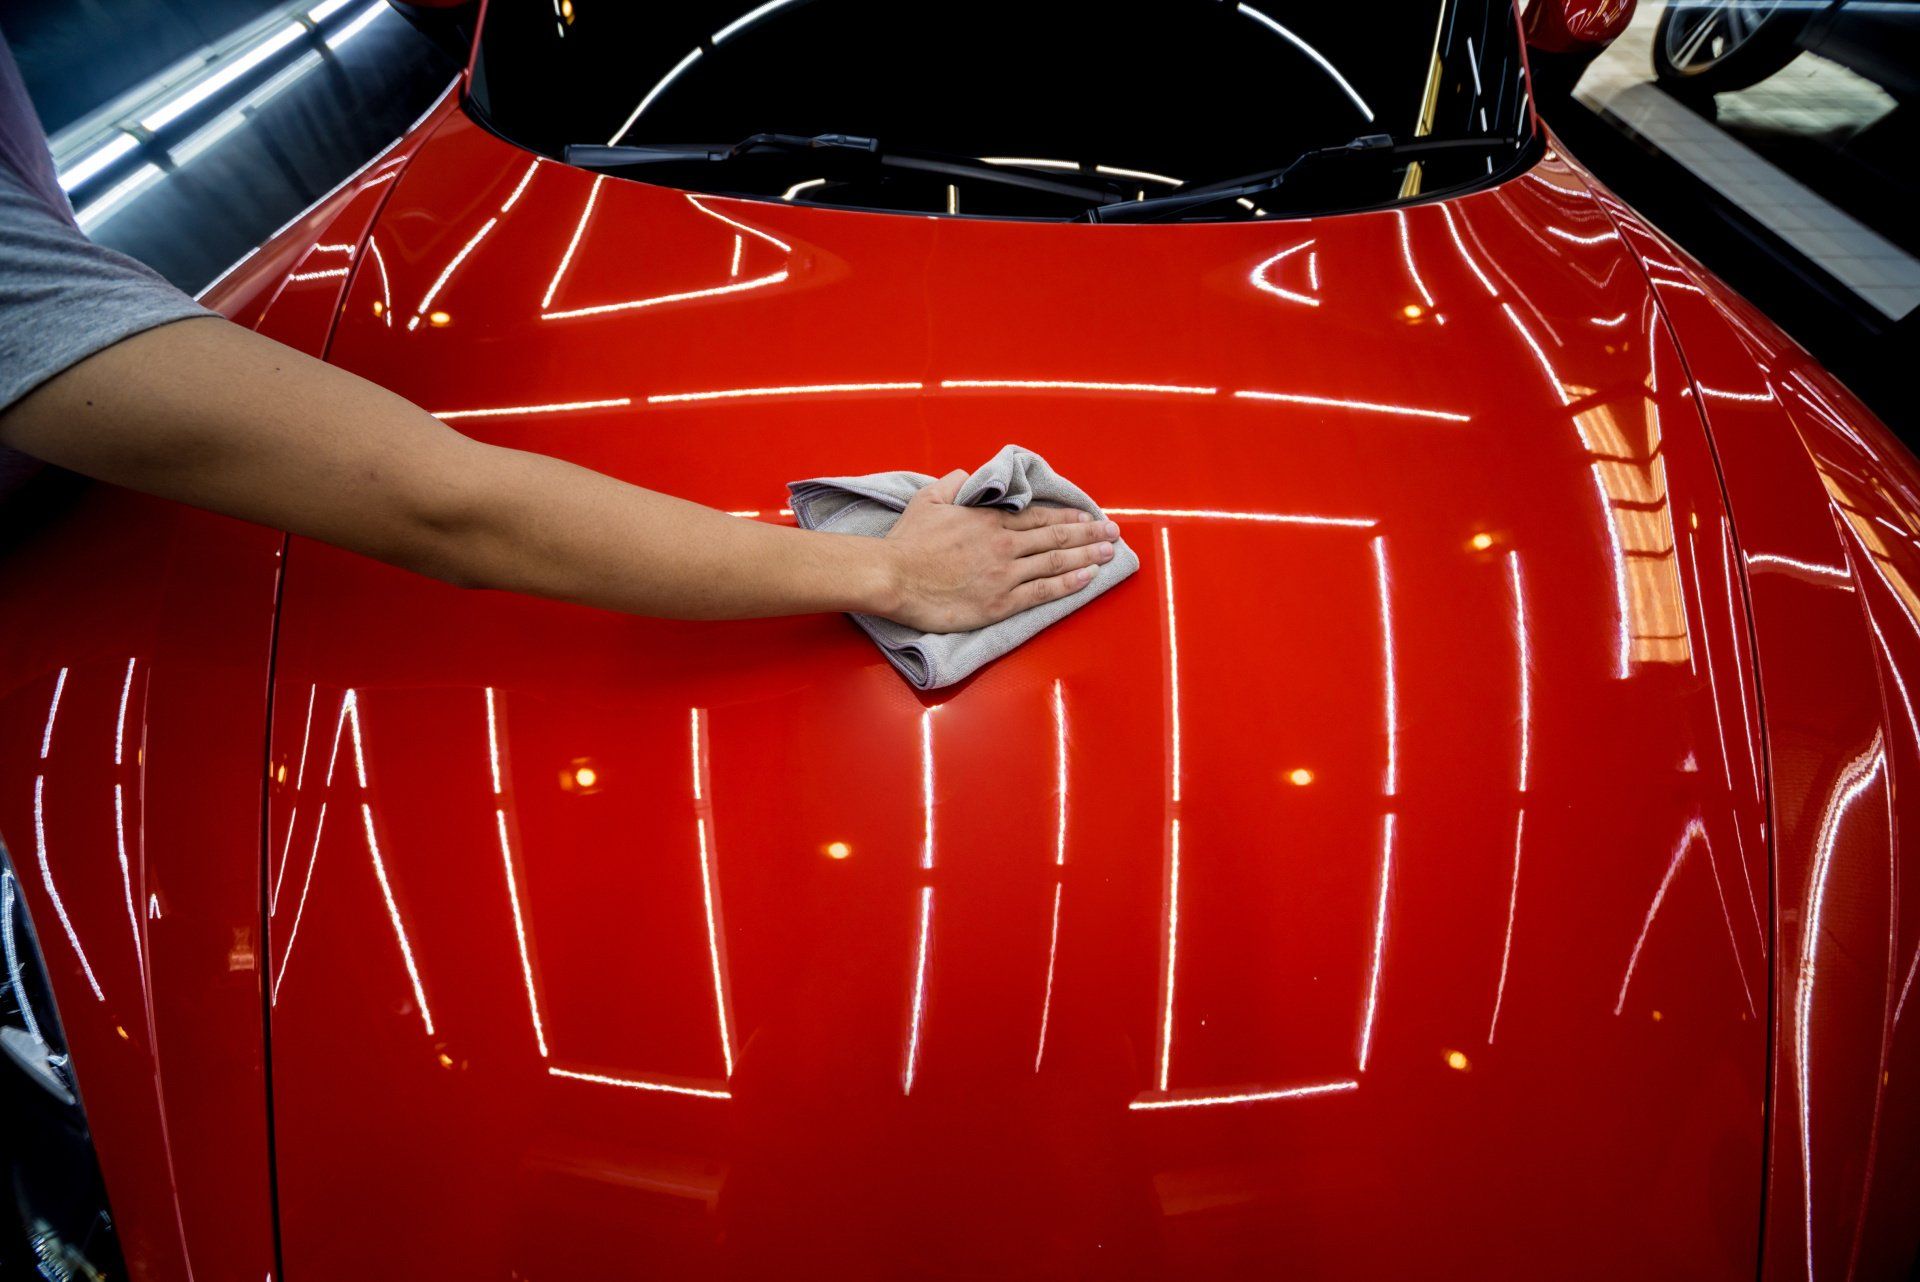 Manuscript Bijna dood Perforatie PPF vs Ceramic Coating: Which Is Better for Car Paint Protection?